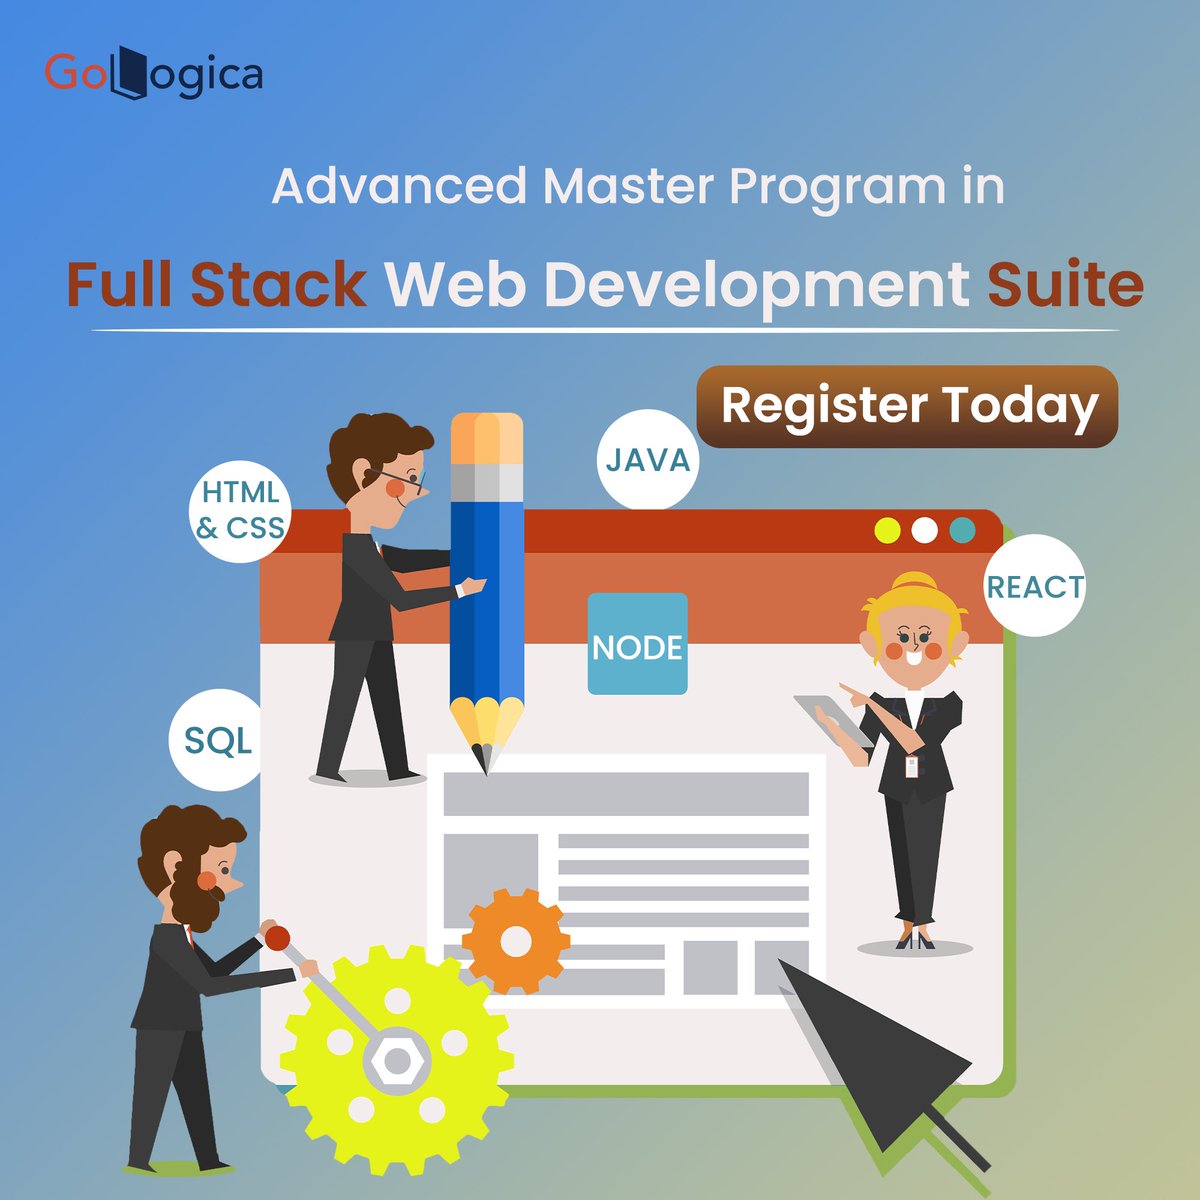 '📷 Elevate your skills with our Advanced Master Program for Full Stack Web Development With GoLogica!

#fullstackdevb #fullstackdevelopment #GoLogica #webdev #webdevelopment #mernstack #mern #html #css #javascript #sql #nodejs #reactjs #react #frontend #backend #webapplication